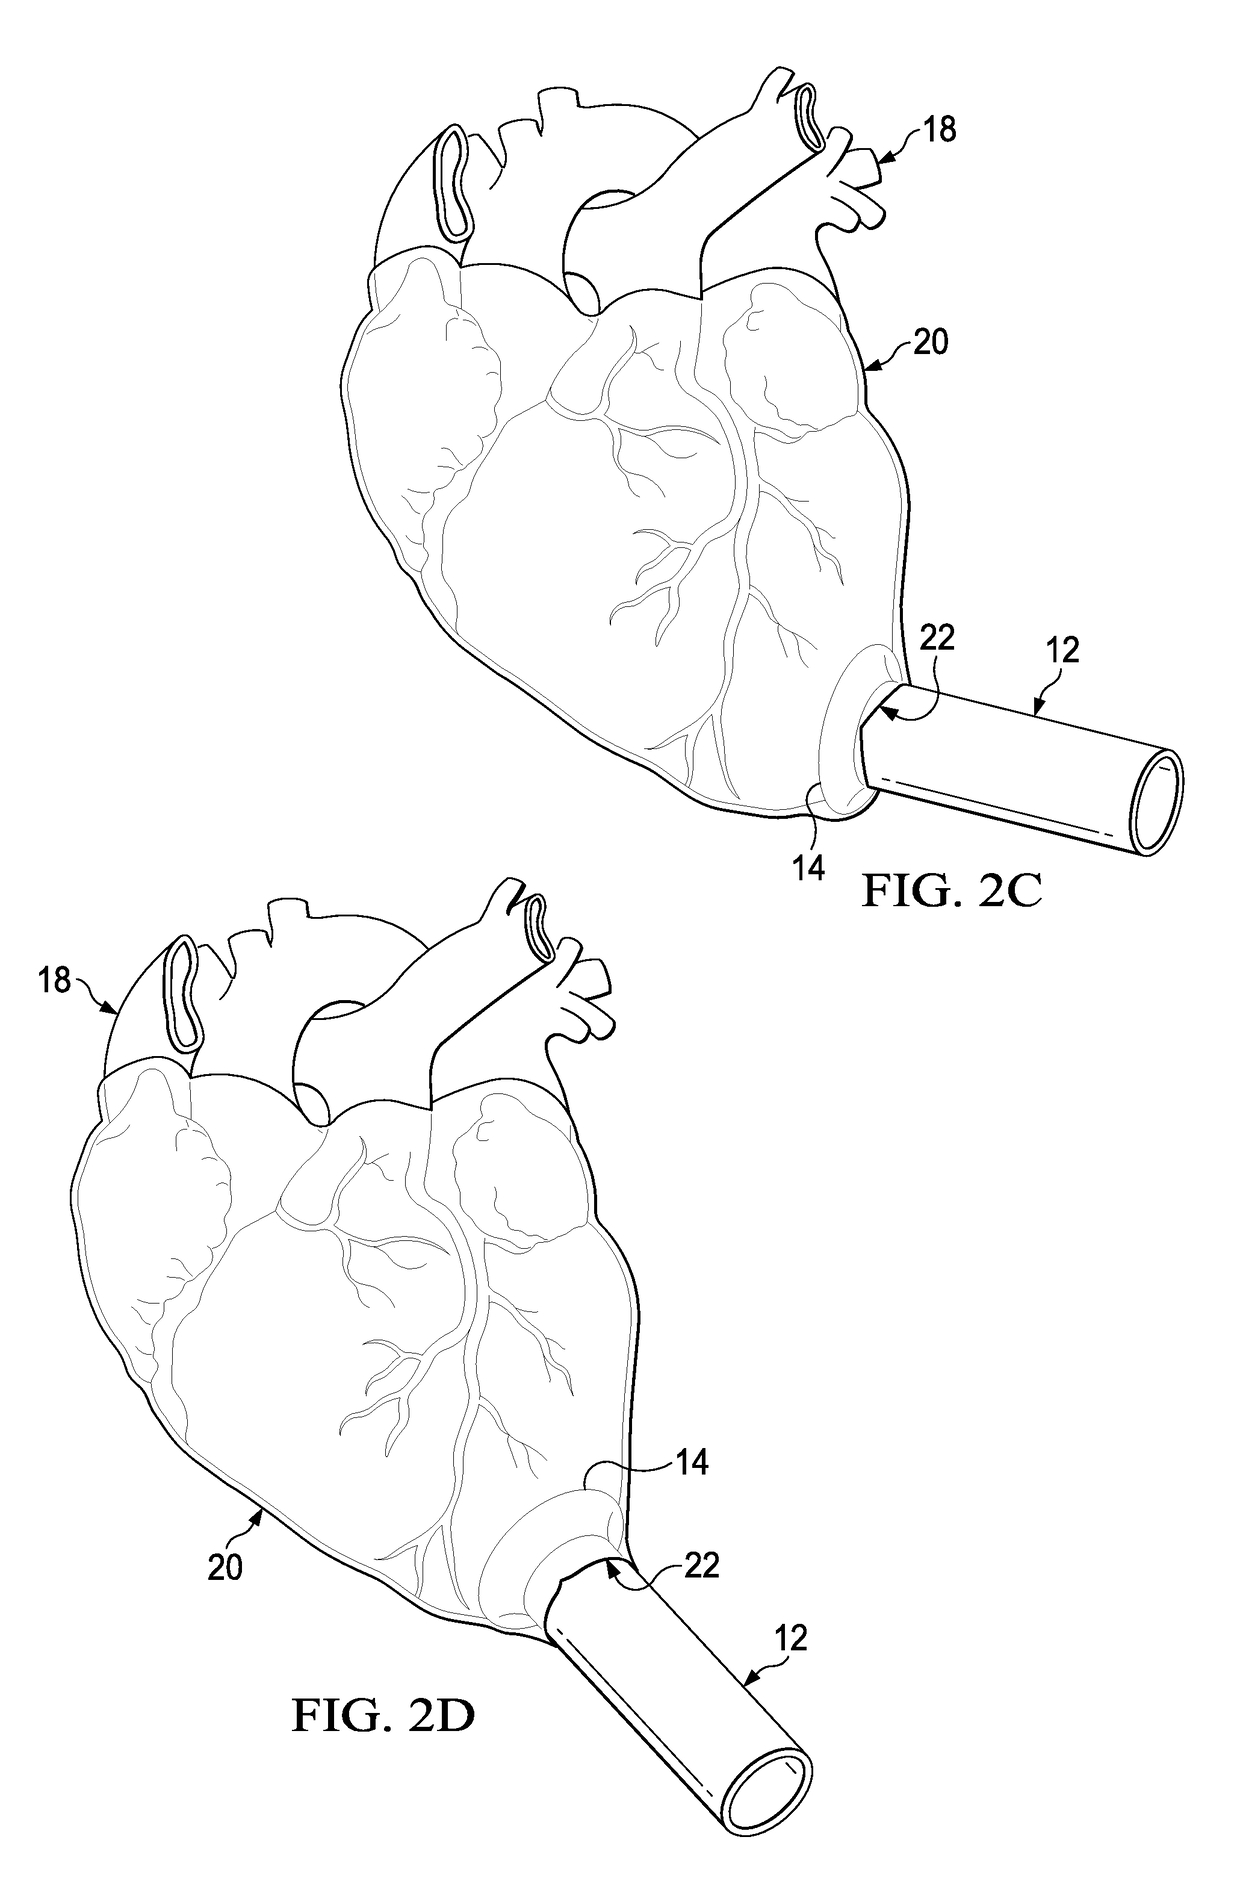 Apparatus and Method for Minimally Invasive Implantation of a Heart Assist Device